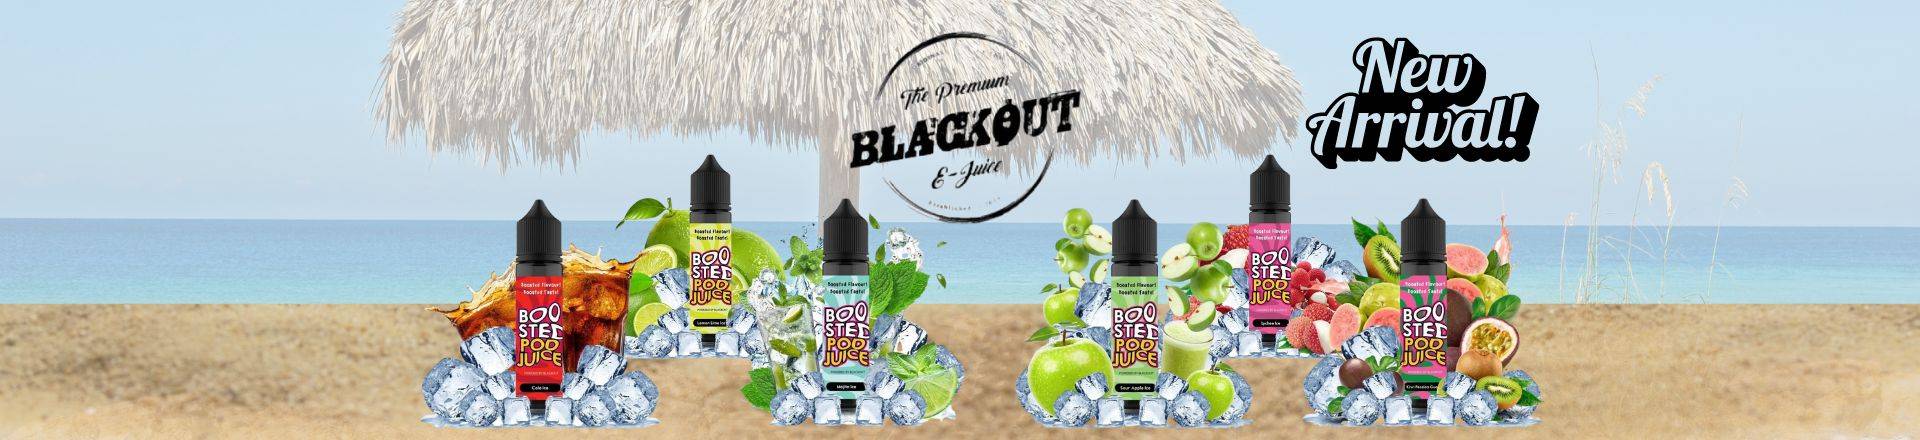 blackout boosted pod juice new